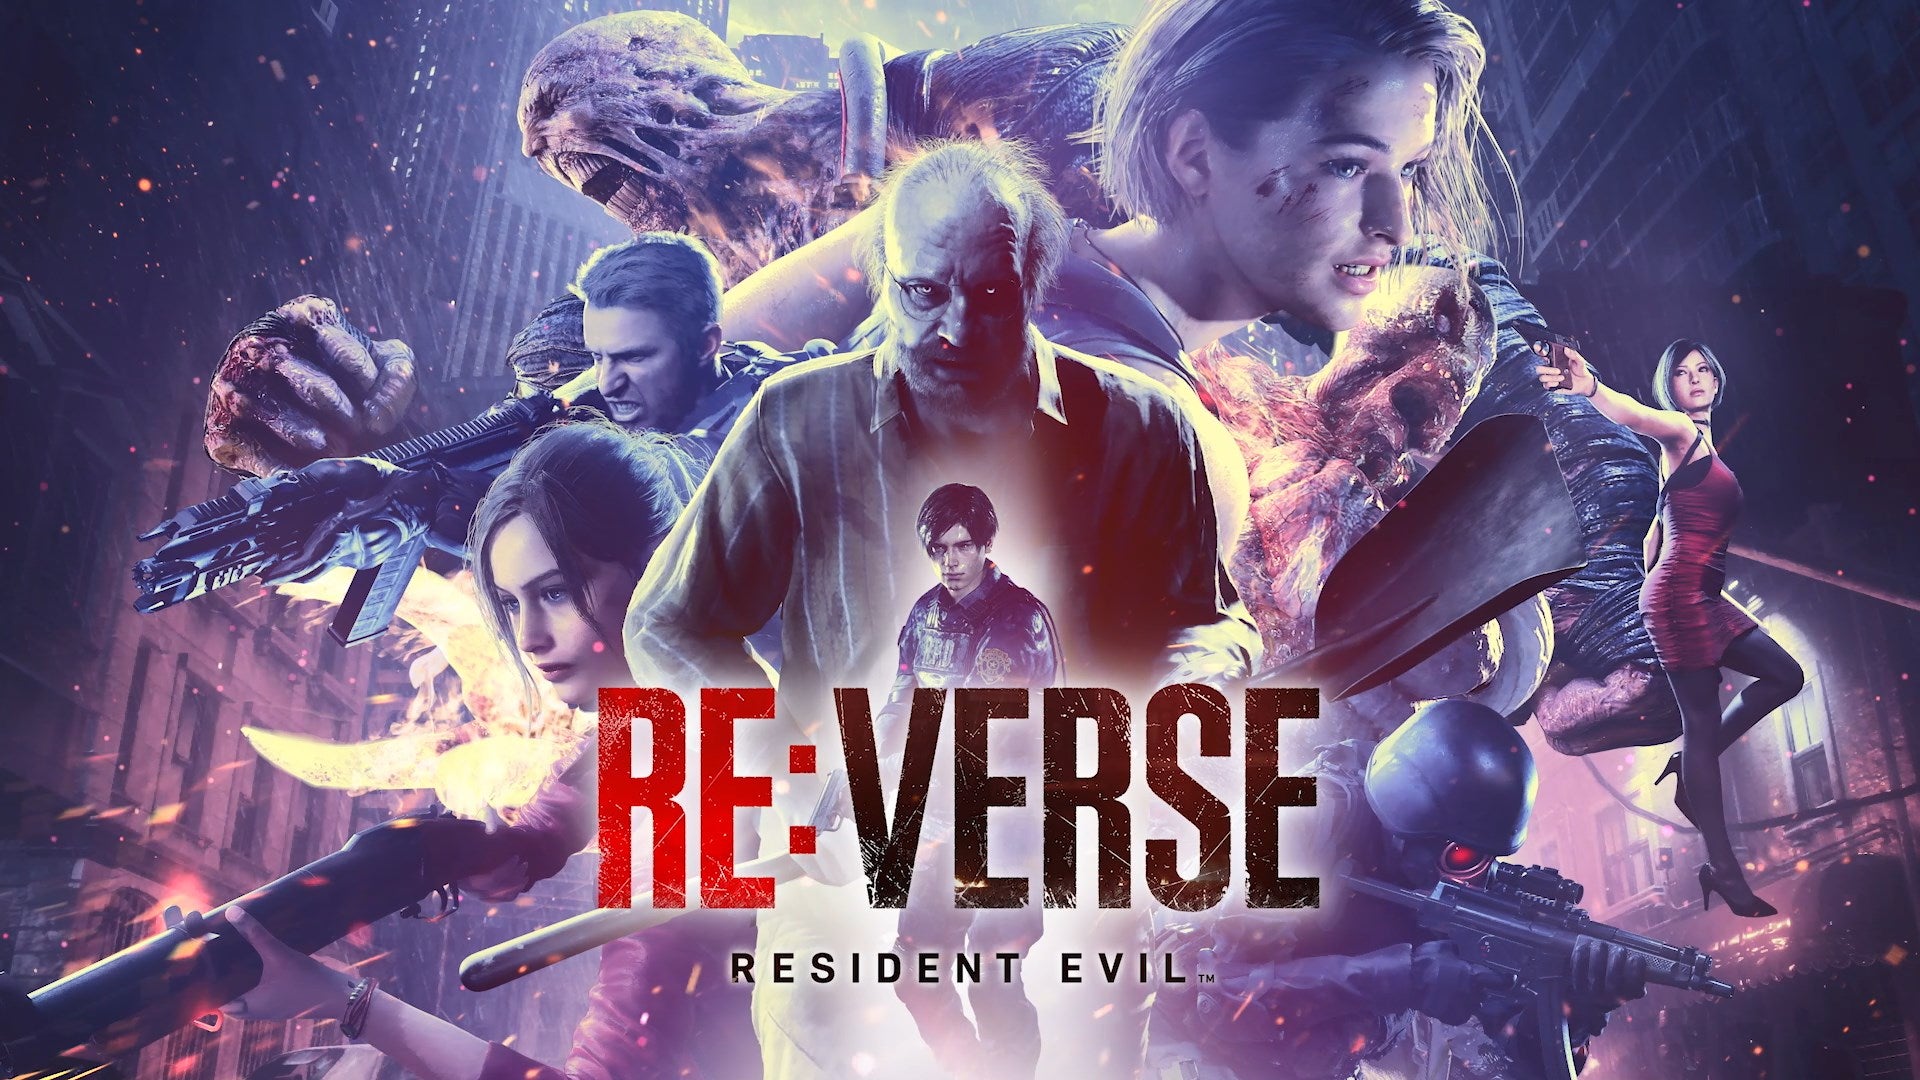 Image for Resident Evil Village will release in May, comes with RE: Verse multiplayer game